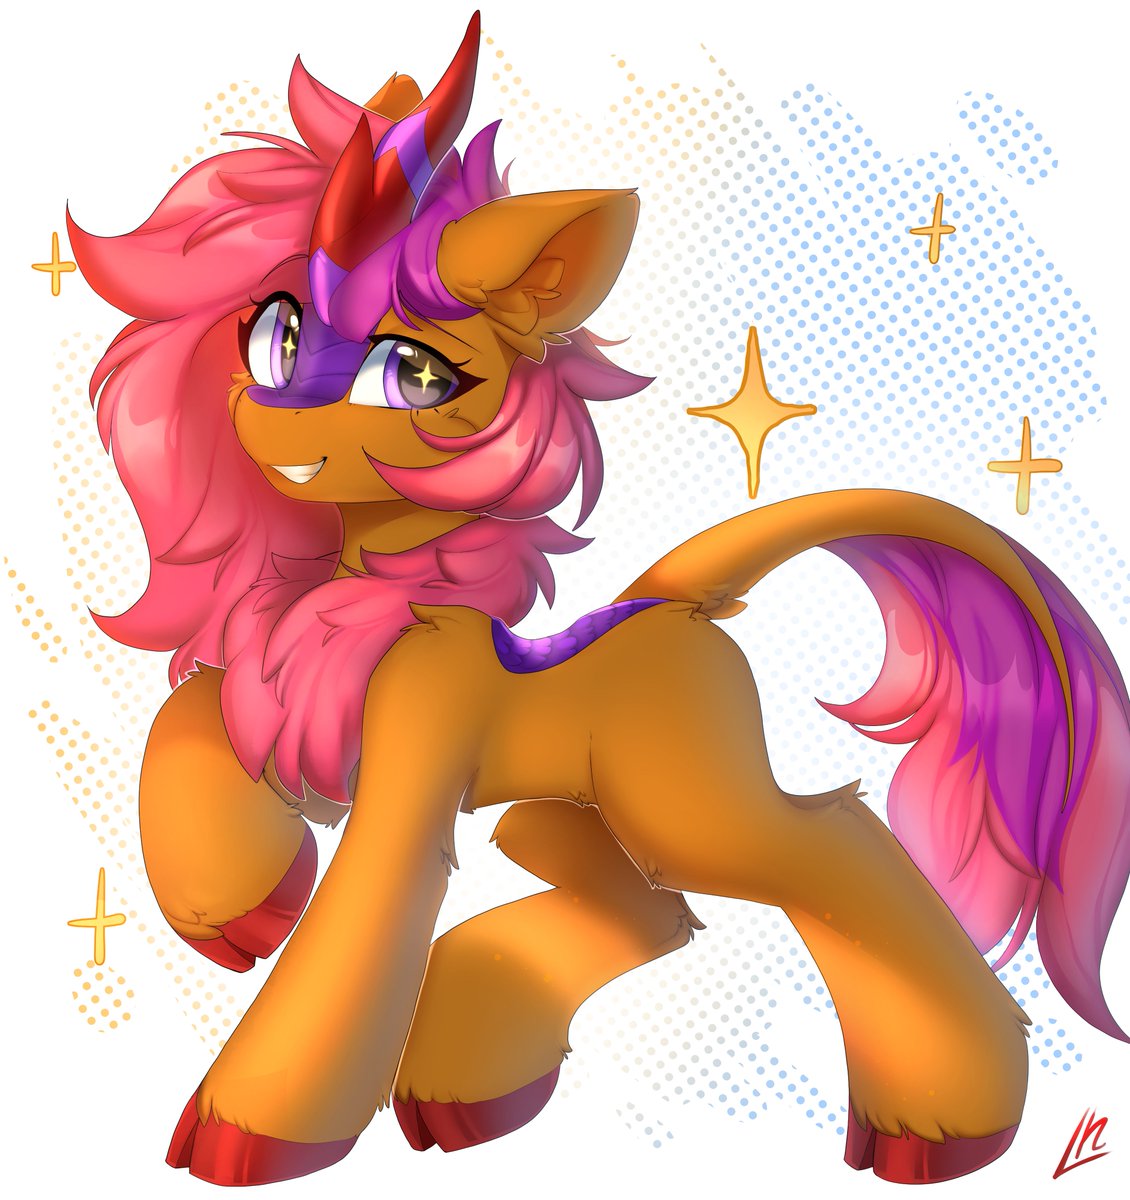 Finished ych of cool kirin!! :3
She knows she cool~
#mlp #mylittlepony #ocart